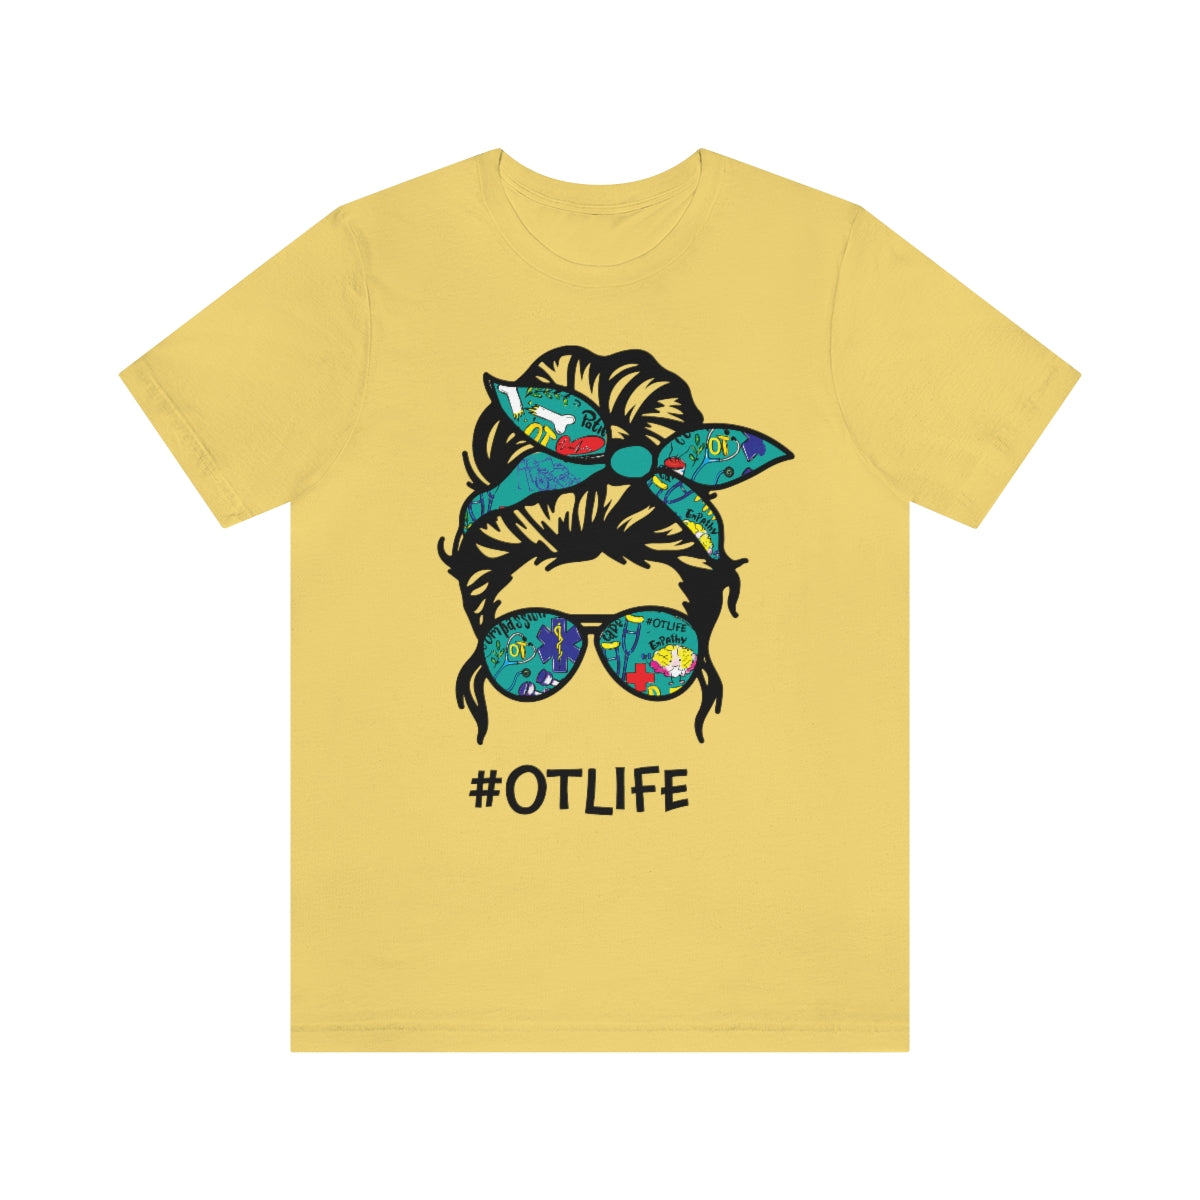 OT Life Occupational Therapy Shirt Graphic Tee